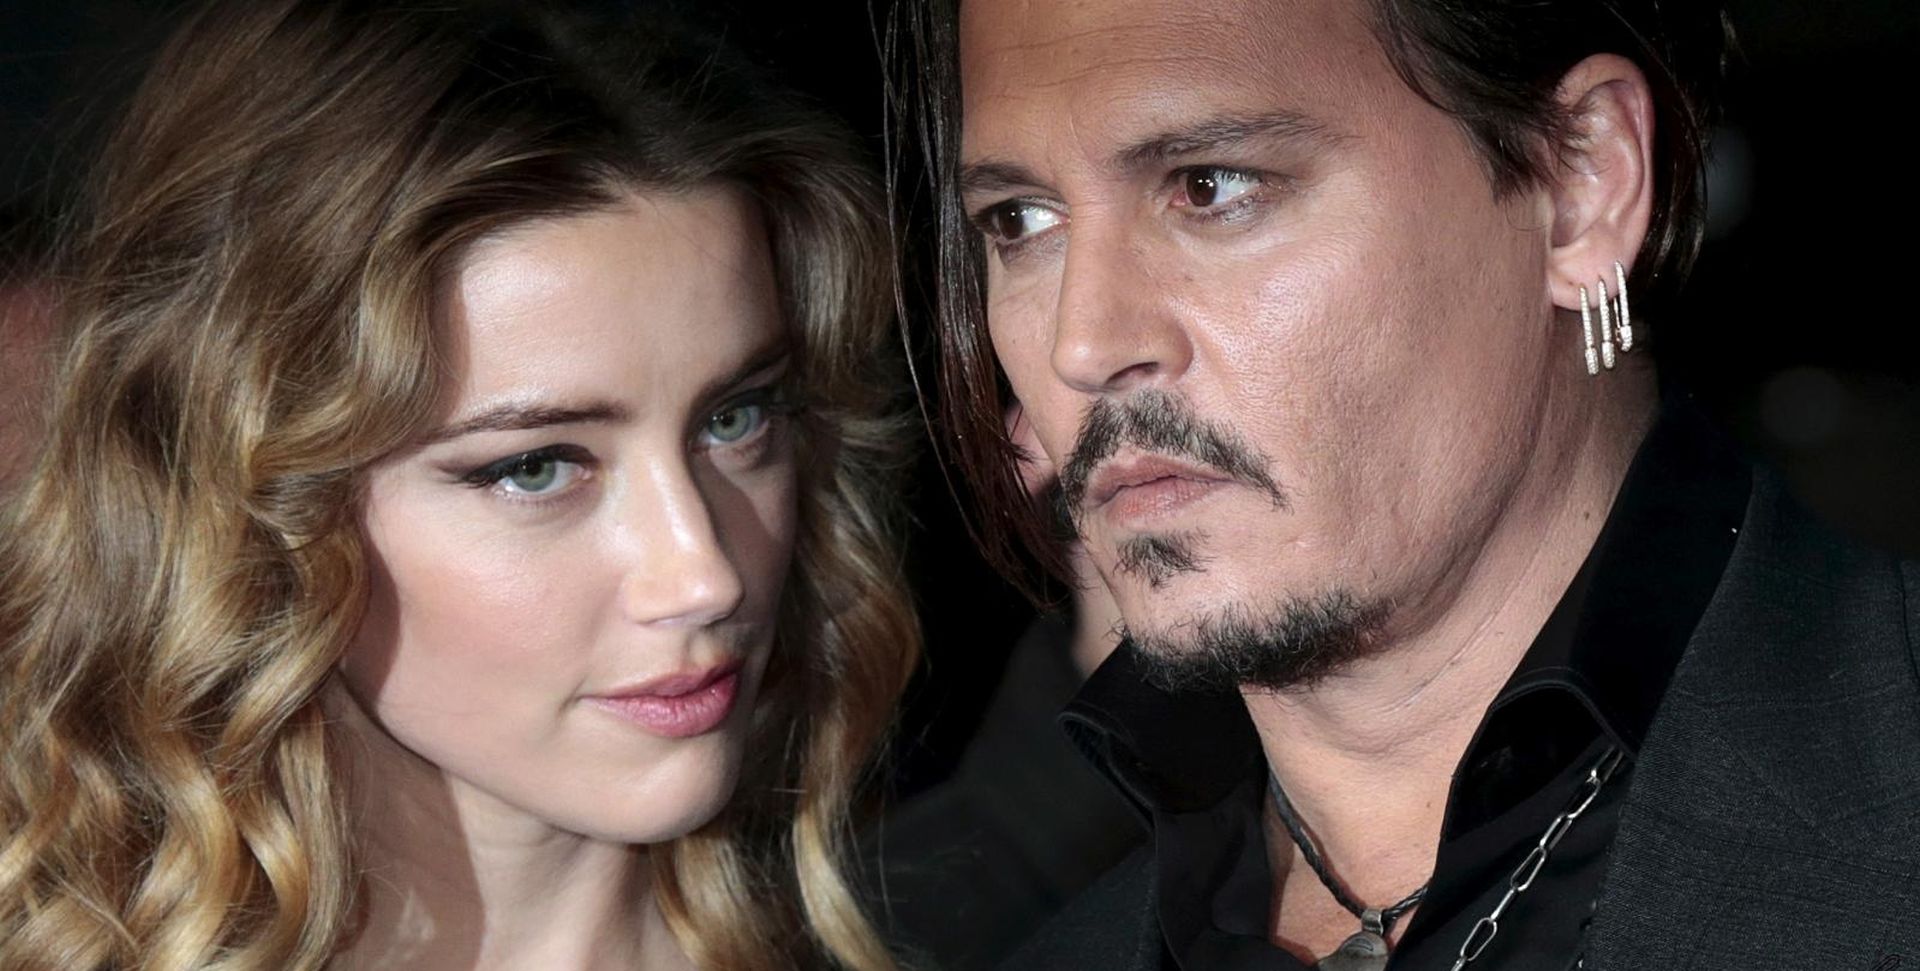 FILE PHOTO: Cast member Johnny Depp and his actress wife Amber Heard arrive for the British premiere of the film "Black Mass" in London FILE PHOTO: Cast member Johnny Depp and his actress wife Amber Heard arrive for the British premiere of the film "Black Mass" in London, Britain October 11, 2015. REUTERS/Suzanne Plunkett//File Photo Suzanne Plunkett